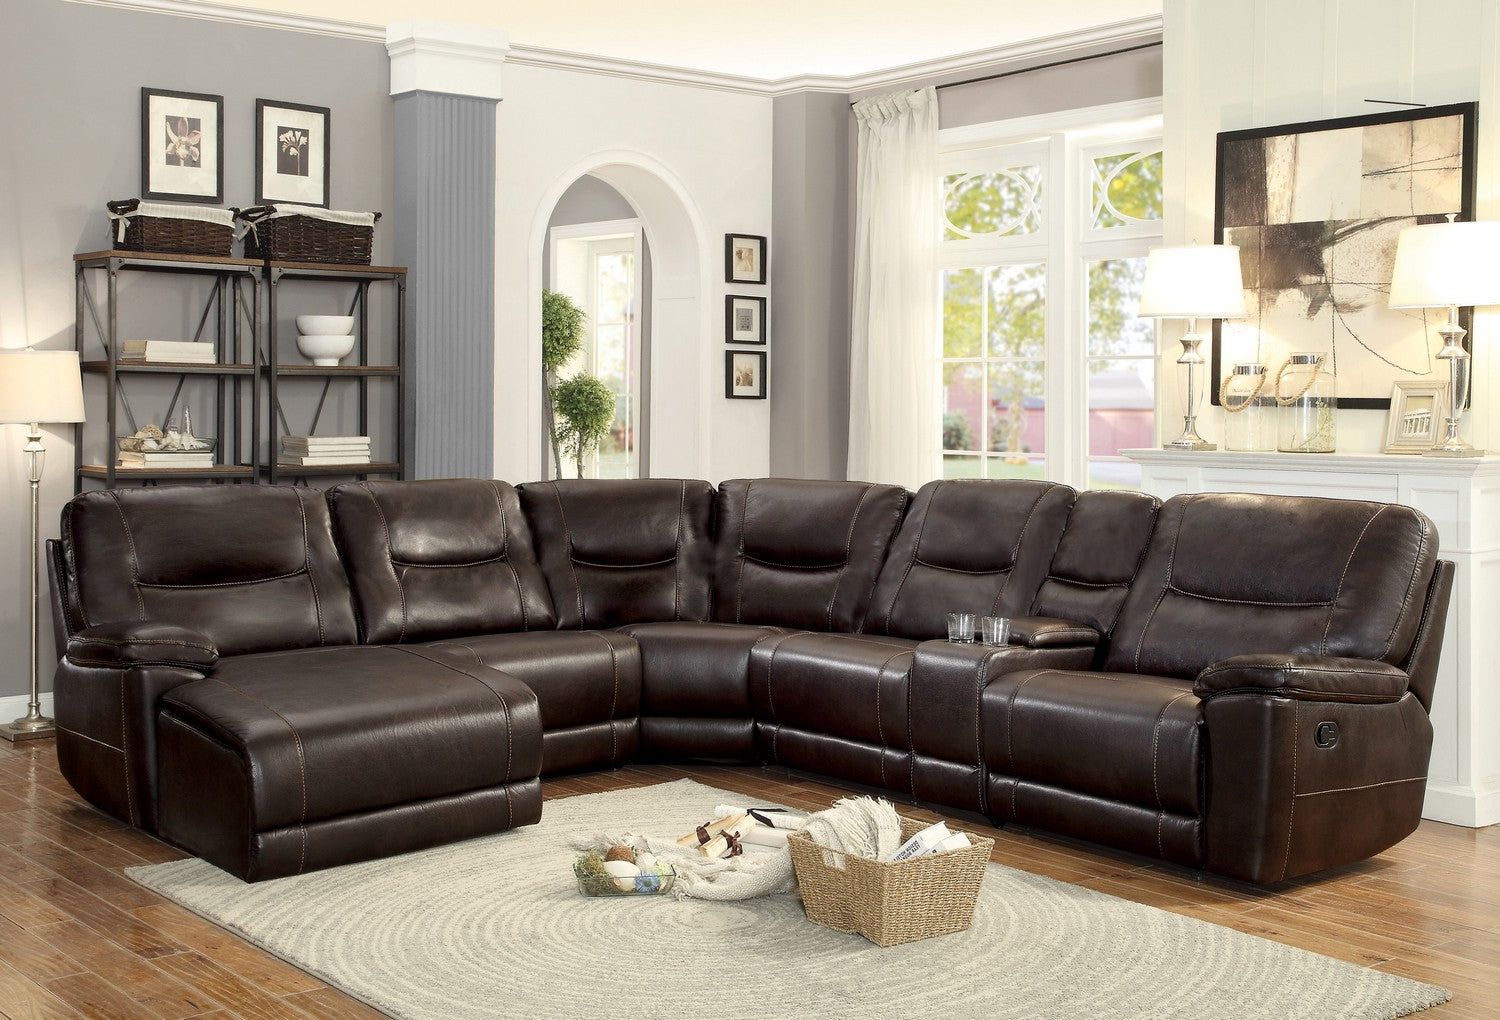 Camel Brown Leather 3 Piece Sectional Sofa Sierra – Having Removable Throughout 3 Piece Leather Sectional Sofa Sets (Gallery 19 of 20)